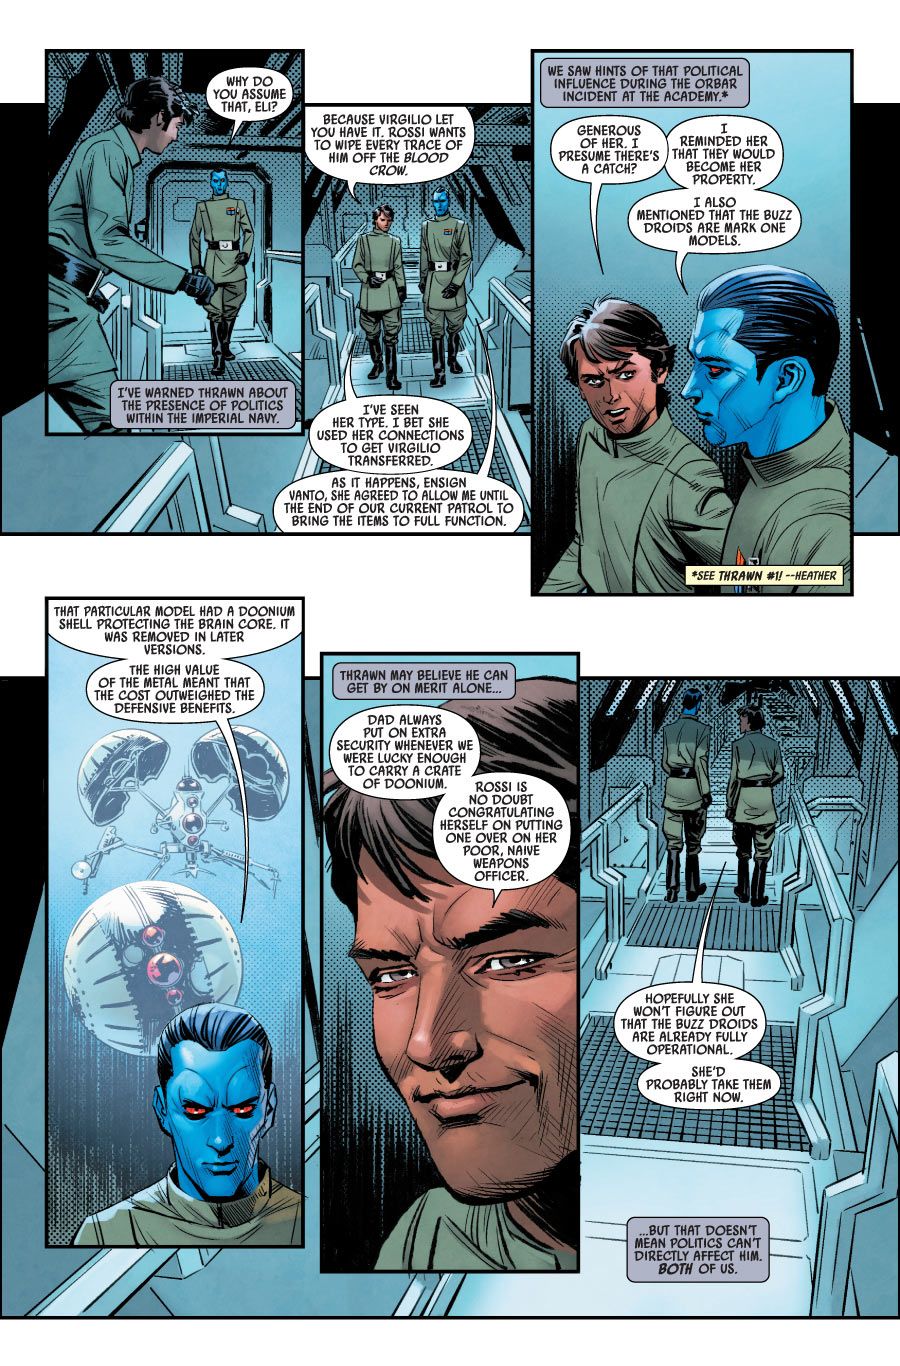 to defeat an enemy thrawn